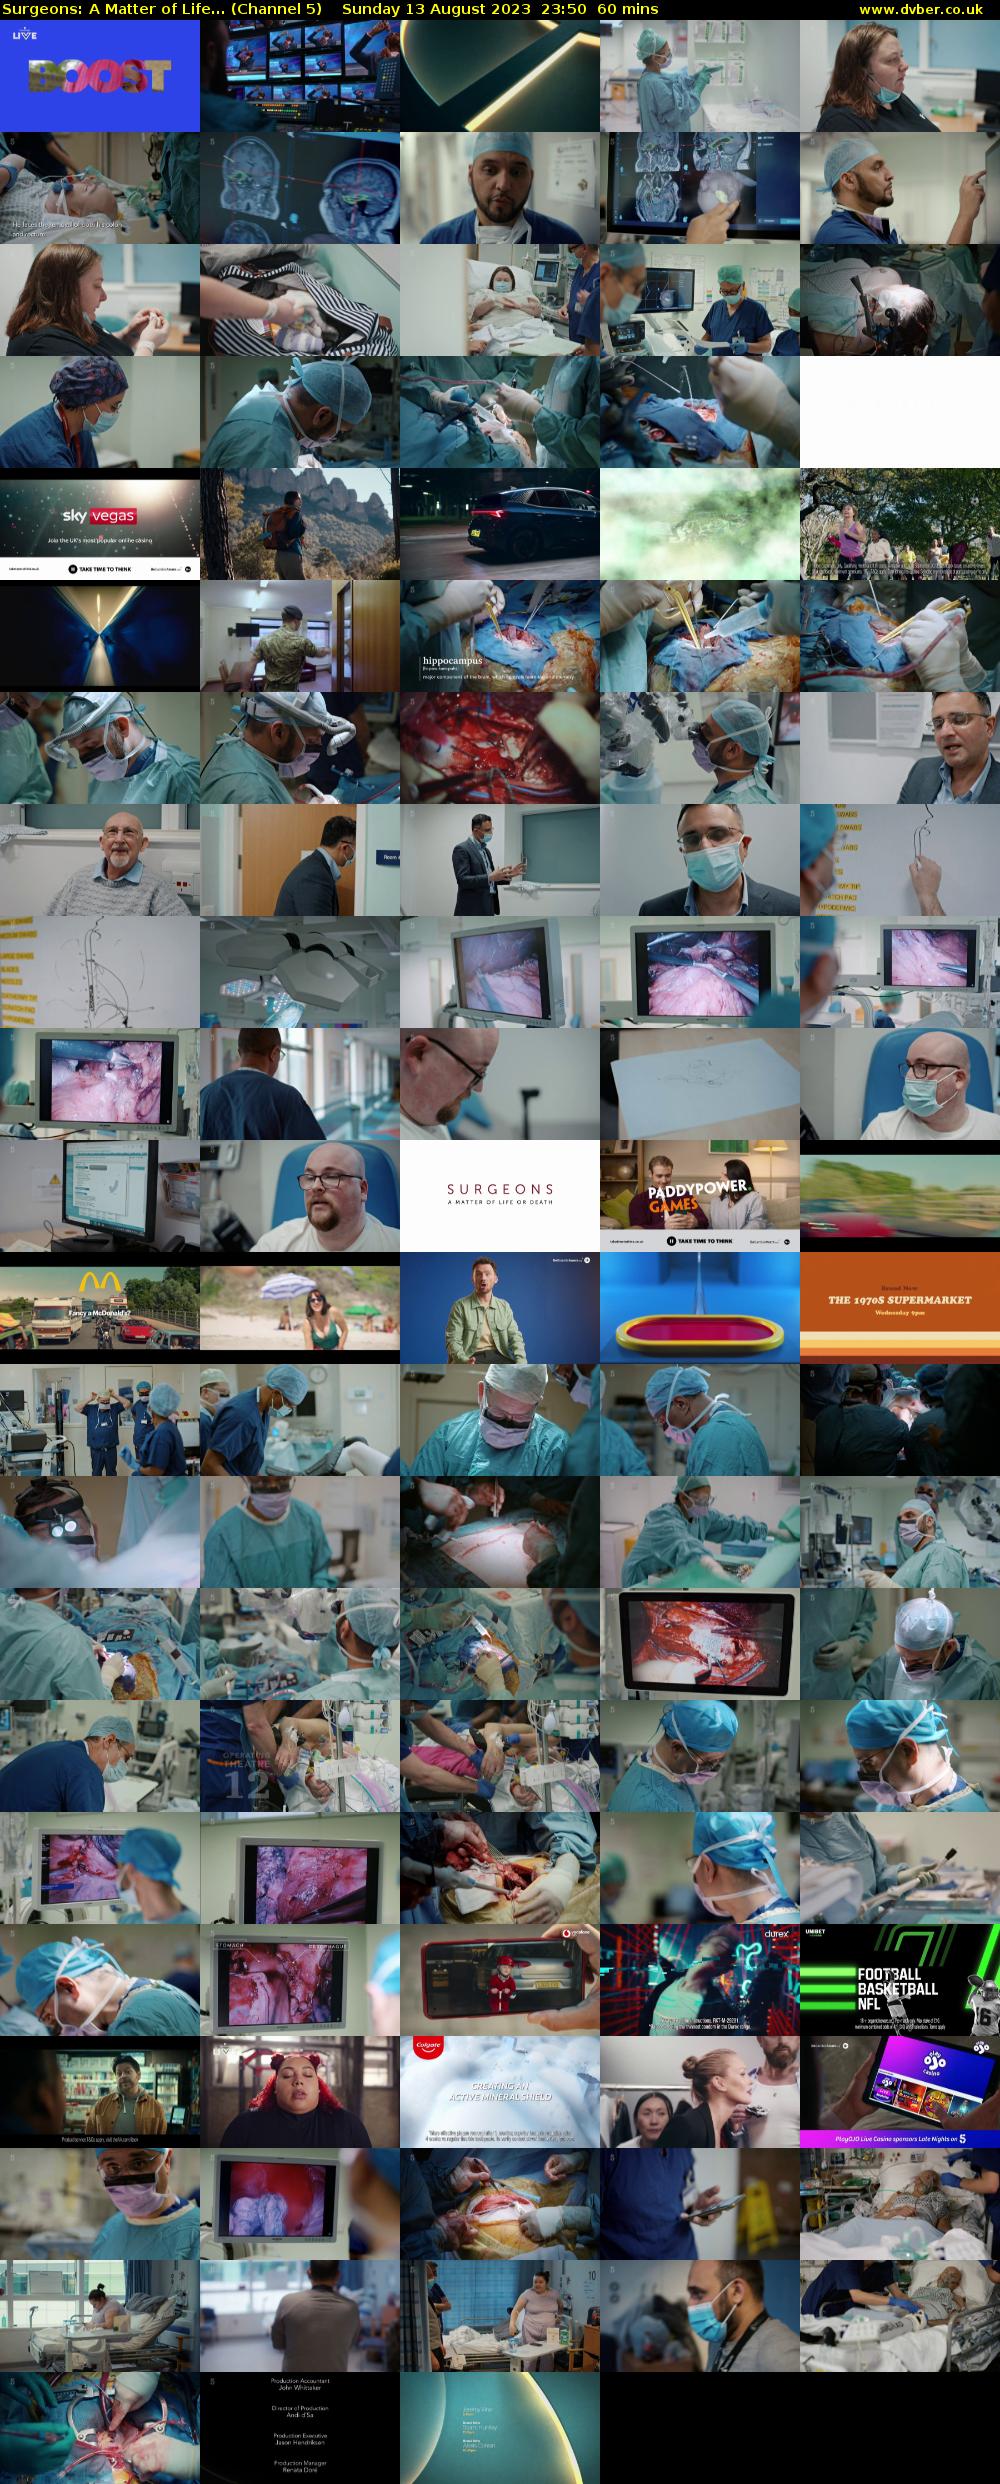 Surgeons: A Matter of Life... (Channel 5) Sunday 13 August 2023 23:50 - 00:50